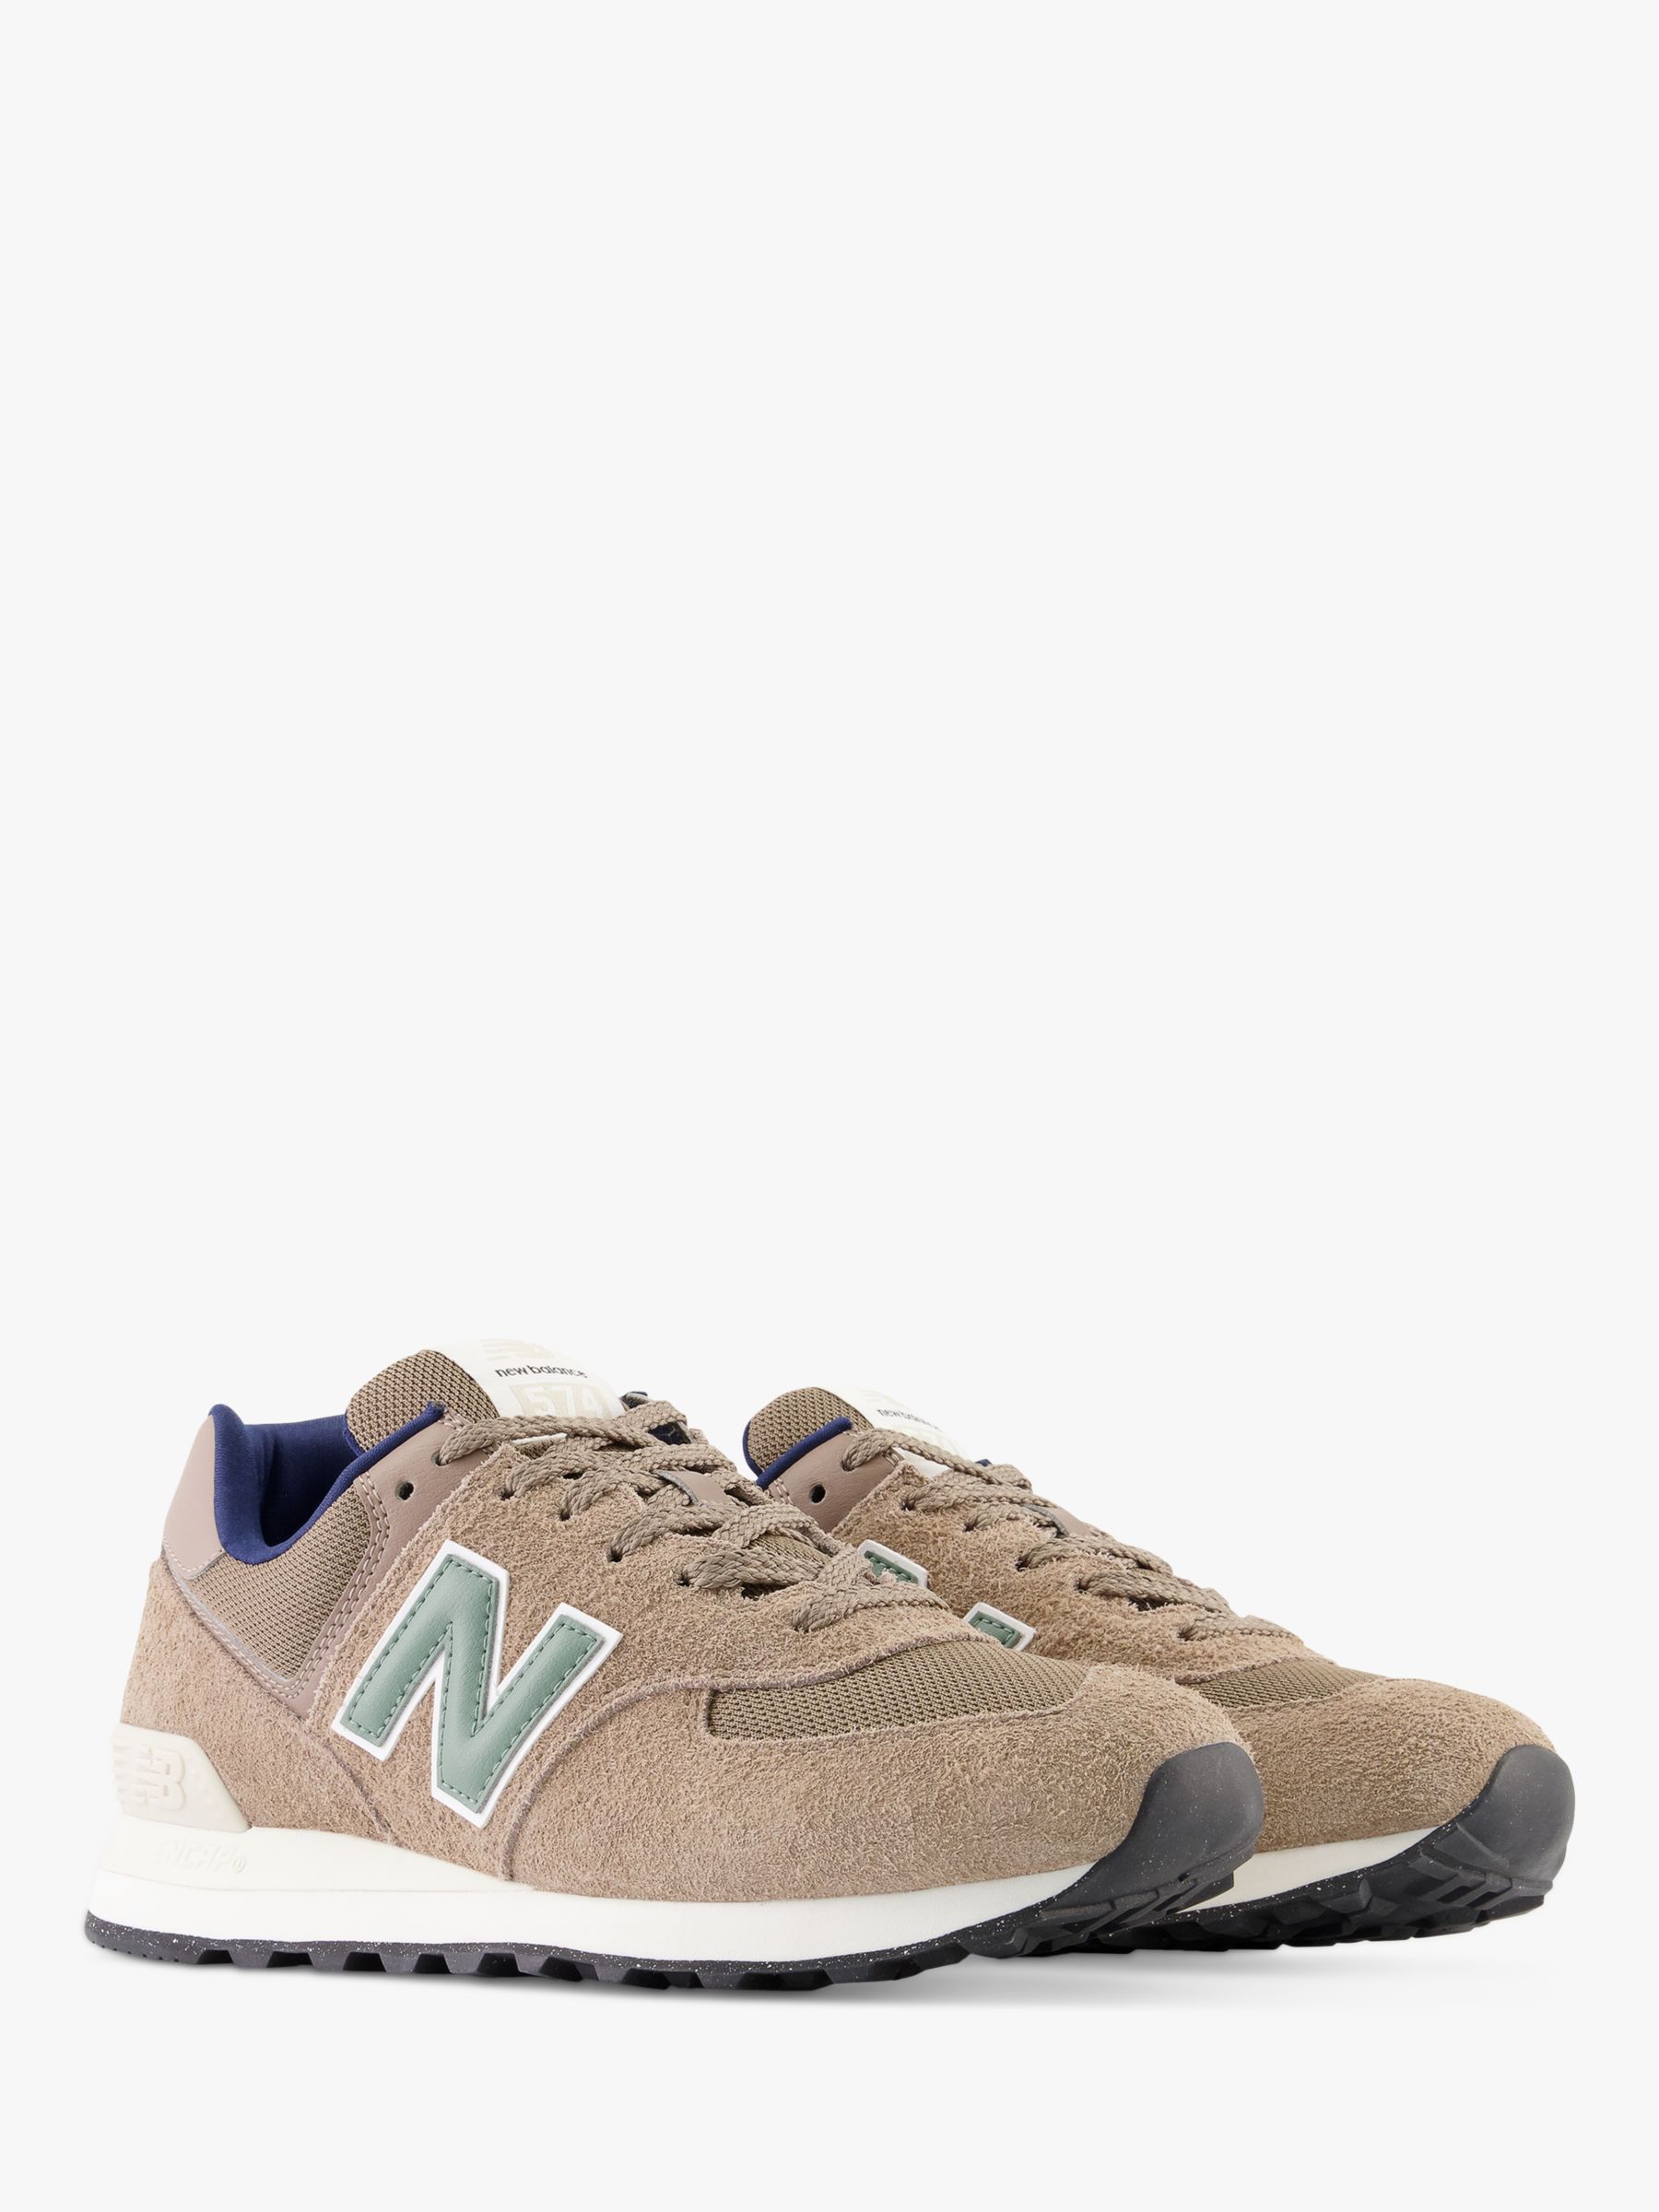 New Balance 574 Suede Trainers, Brown at John Lewis & Partners